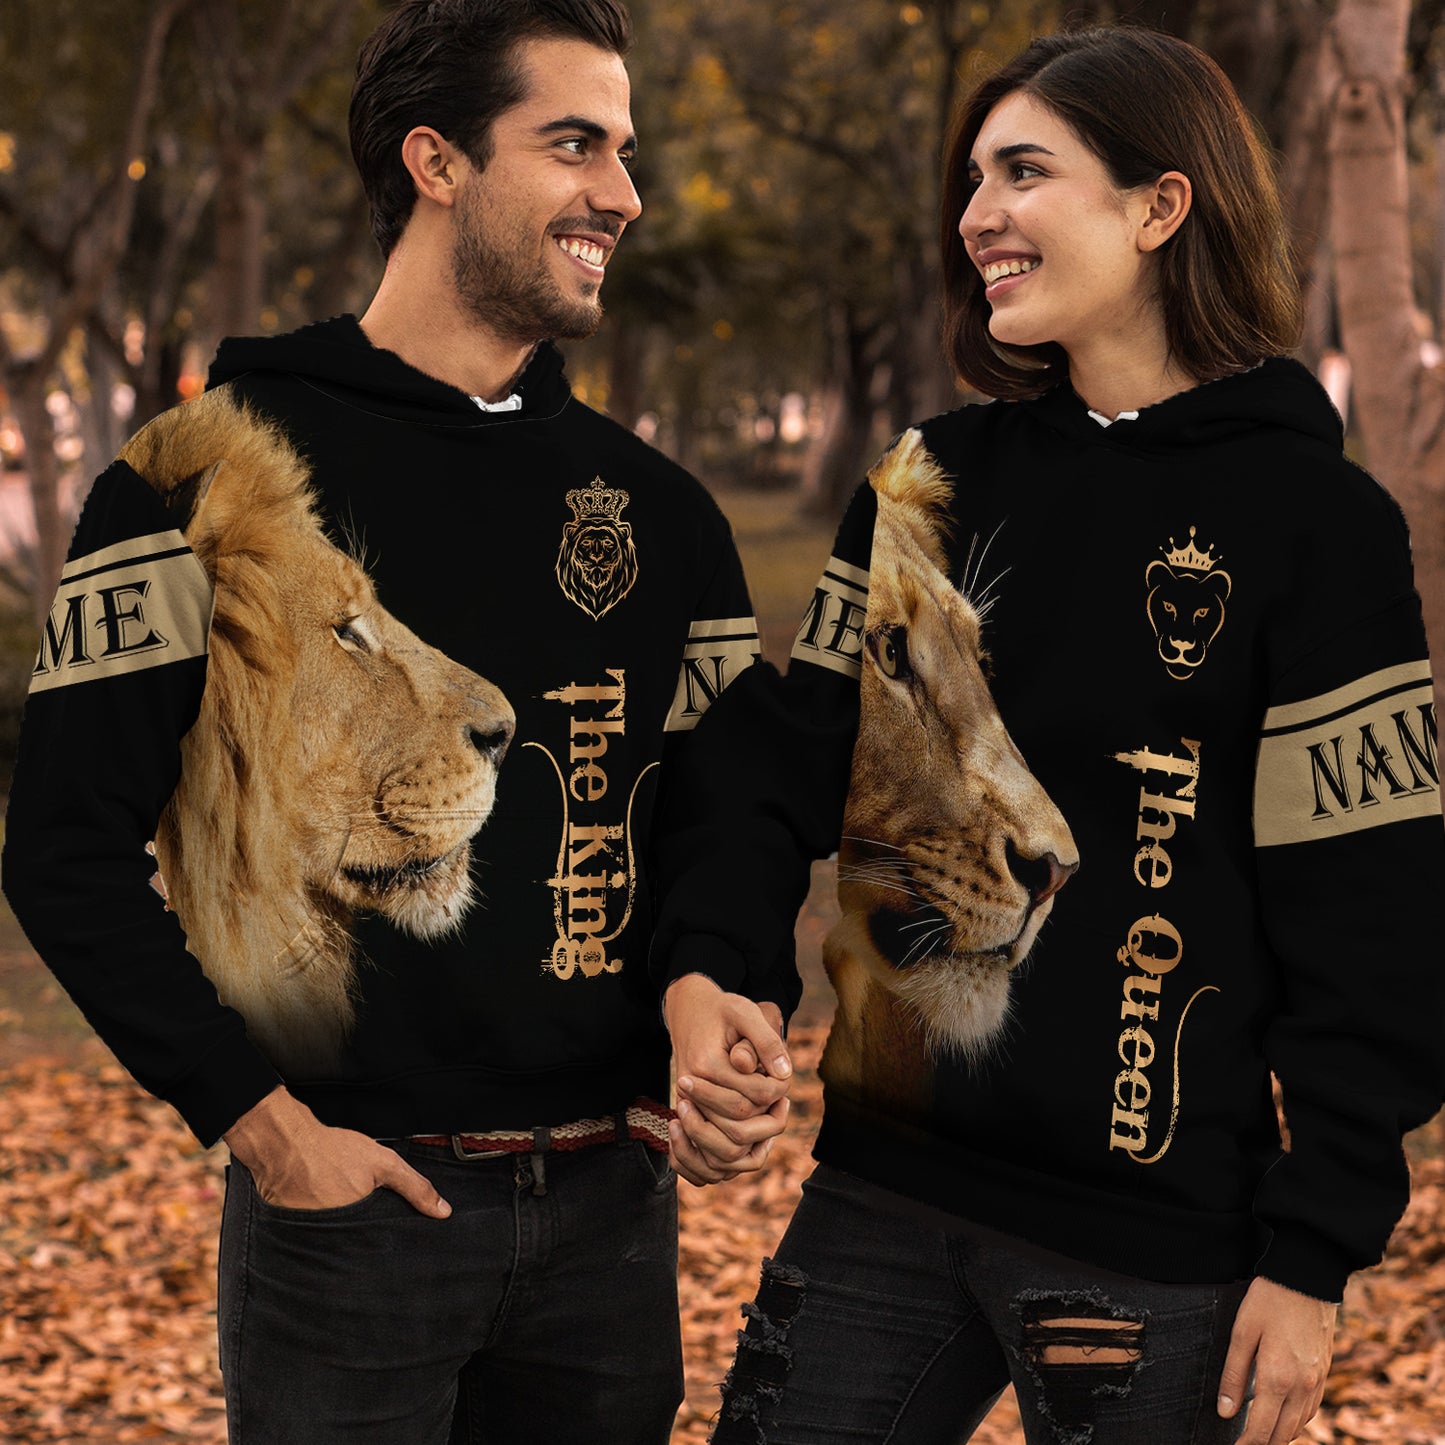 Personalized King And Queen Matching Hoodie My Queen Keeps Me Wild My King Keeps Me Safe